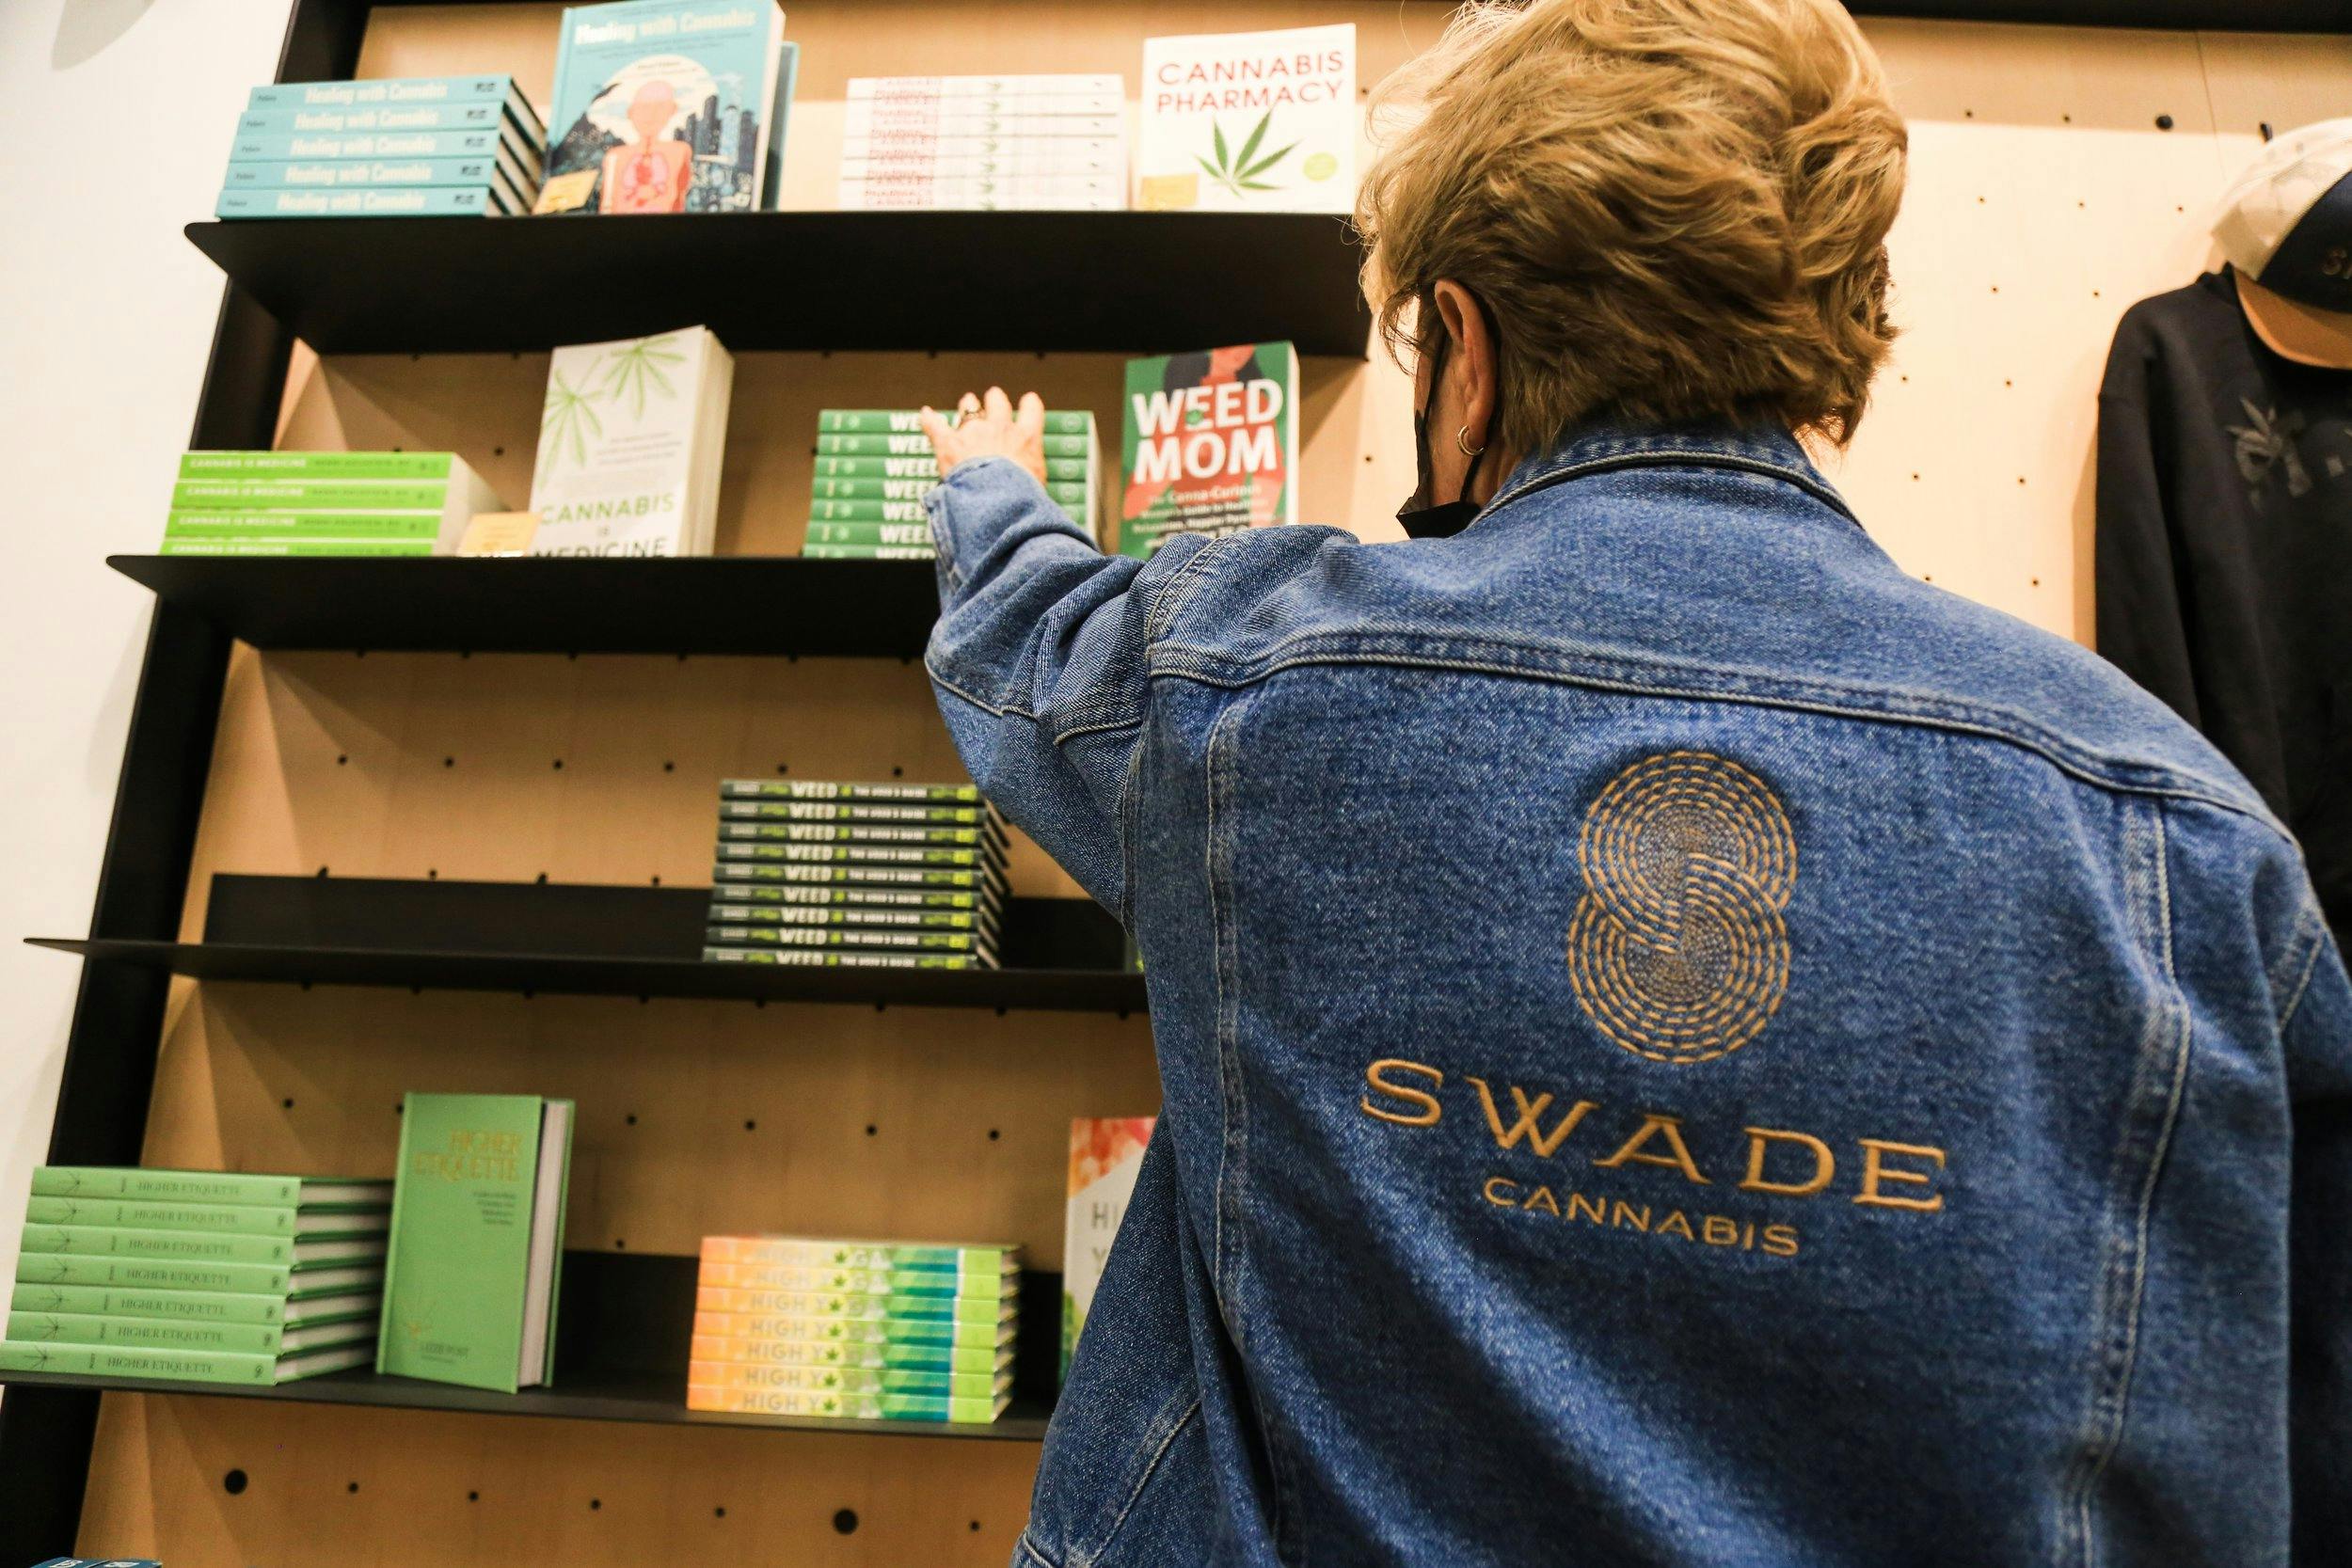 A person reaches for a book on display shelves inside a modern dispensary - they are wearing a Swade Cannabis jean jacket and reaching for the book title Weed Mom